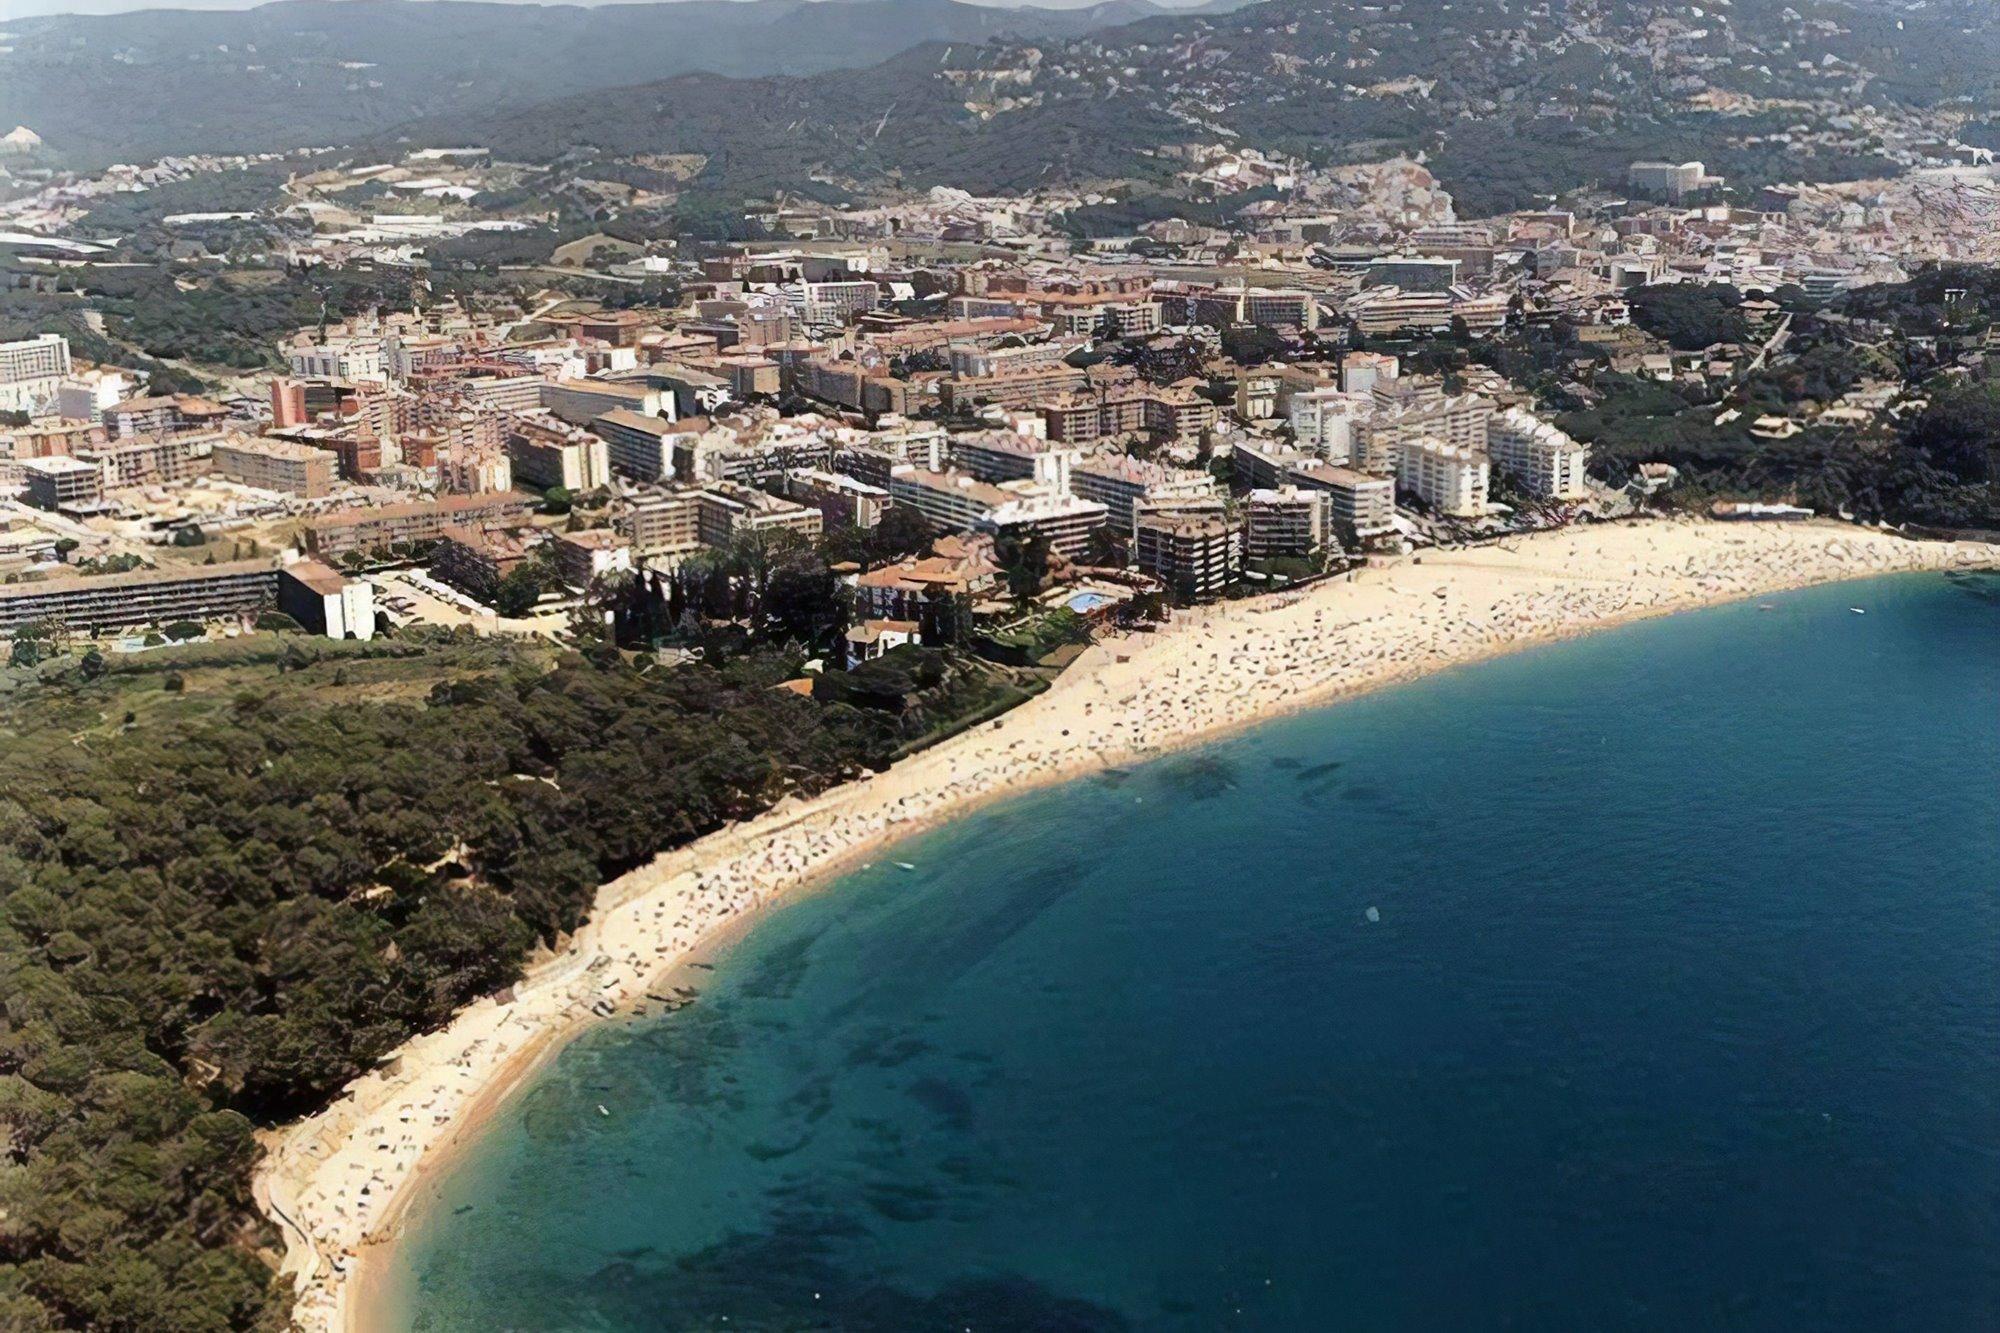 Dog Owner In Spain's Catalunya Drowns During Sea Rescue At Costa Brava Beach On Lloret De Mar